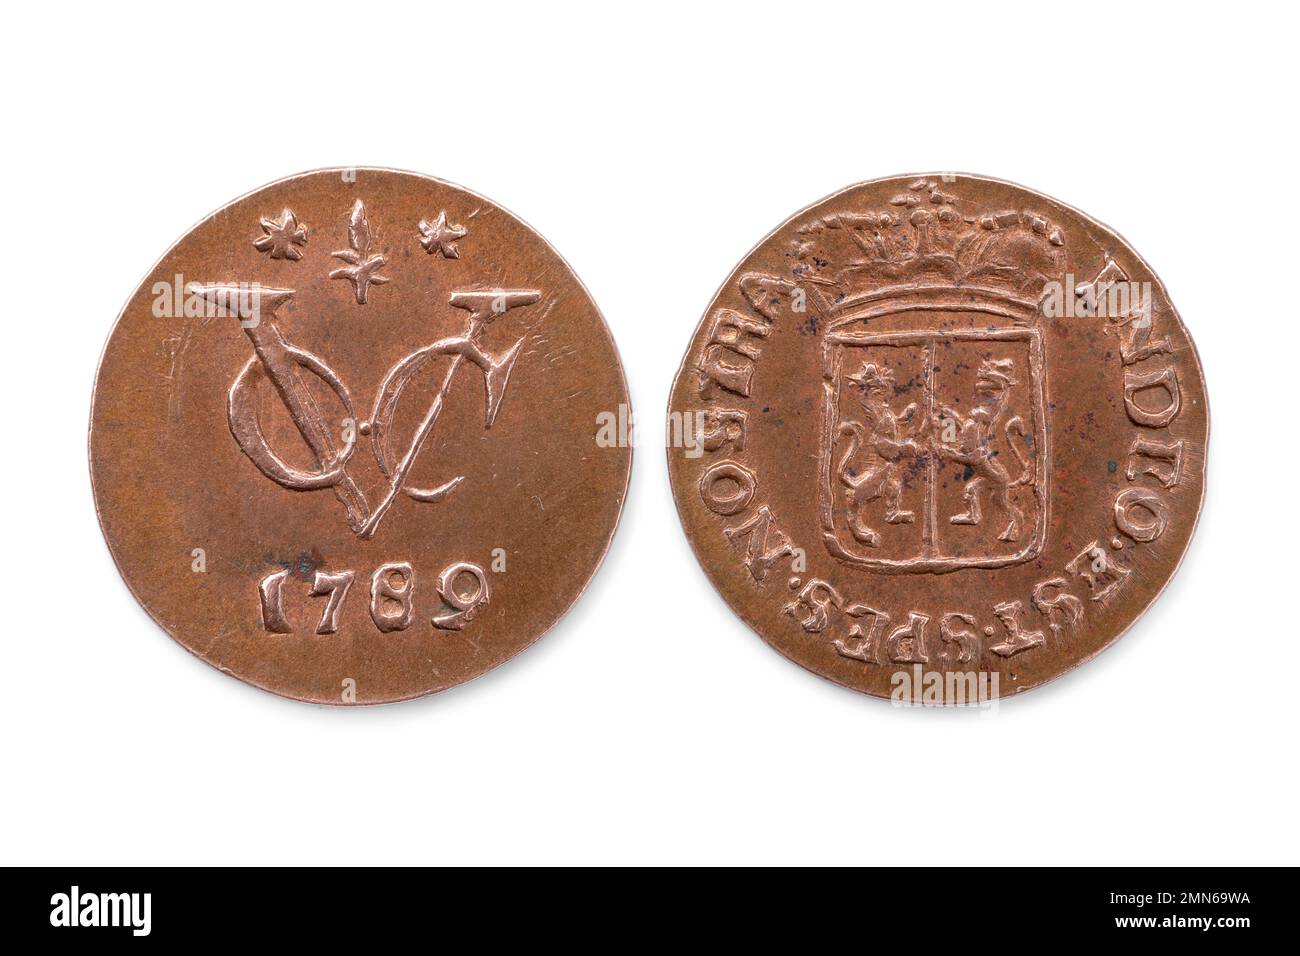 Back and front of a an old VOC coin from 1789 isolated on white background Stock Photo